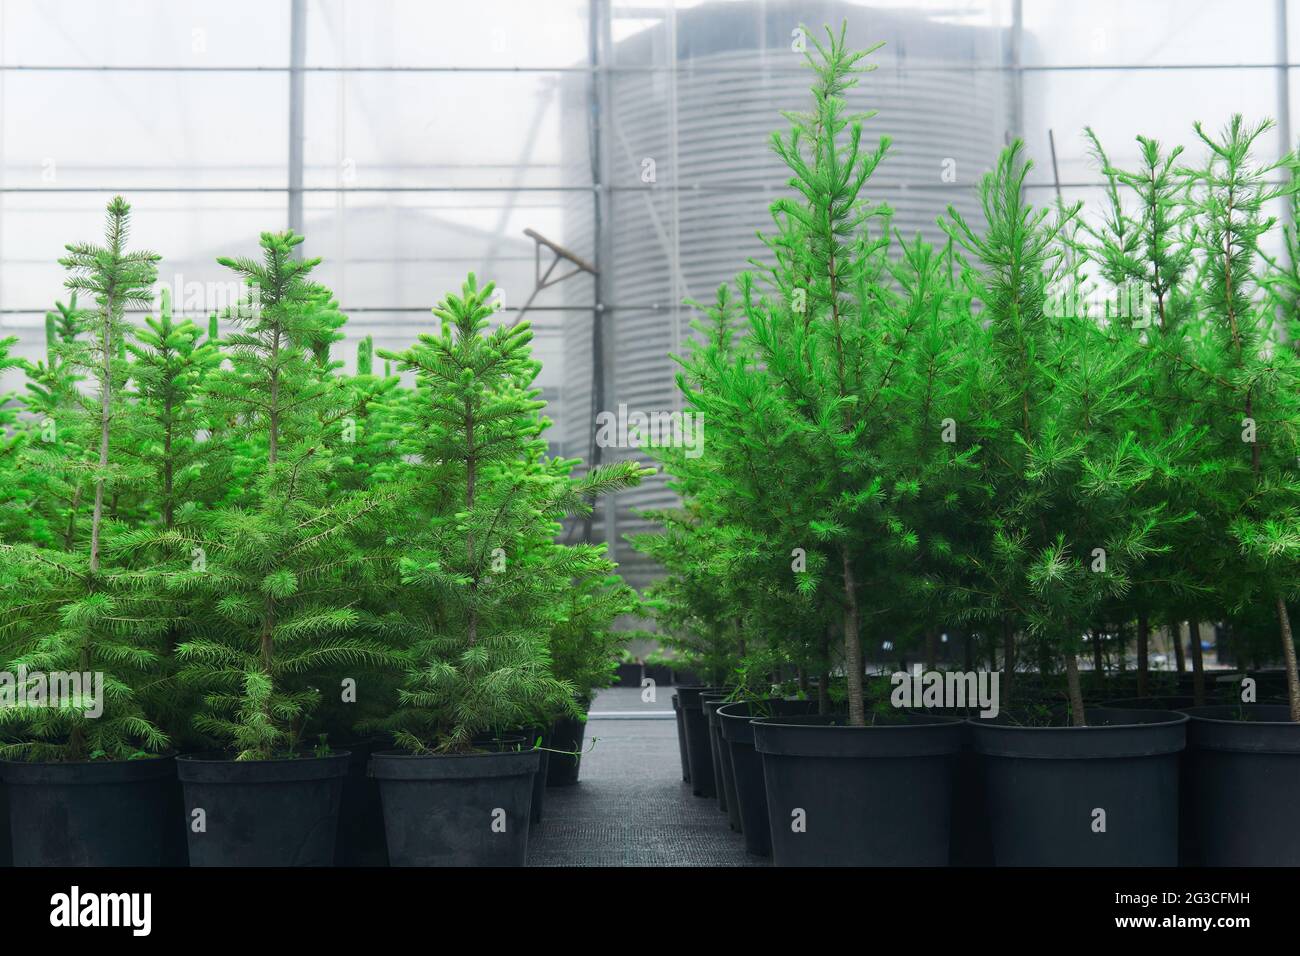 spruce, larch and fir tree seedlings in pots in a tree nursery on the background of the greenhouse Stock Photo